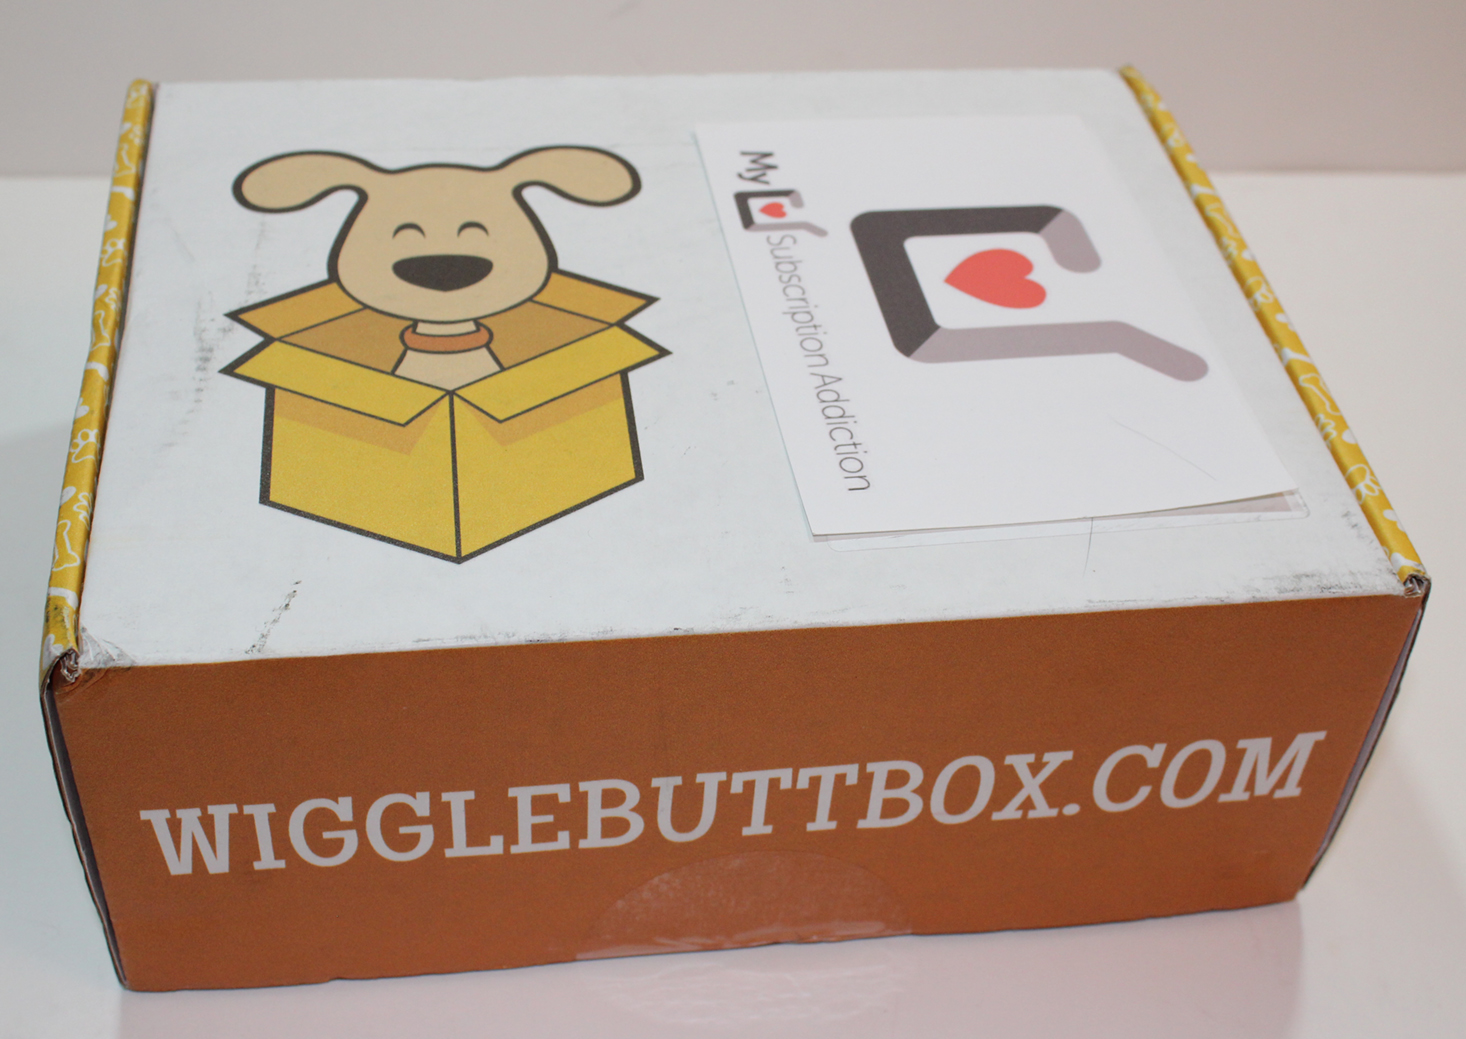 Wigglebutt Box Dog Subscription Review + Coupon- October 2016